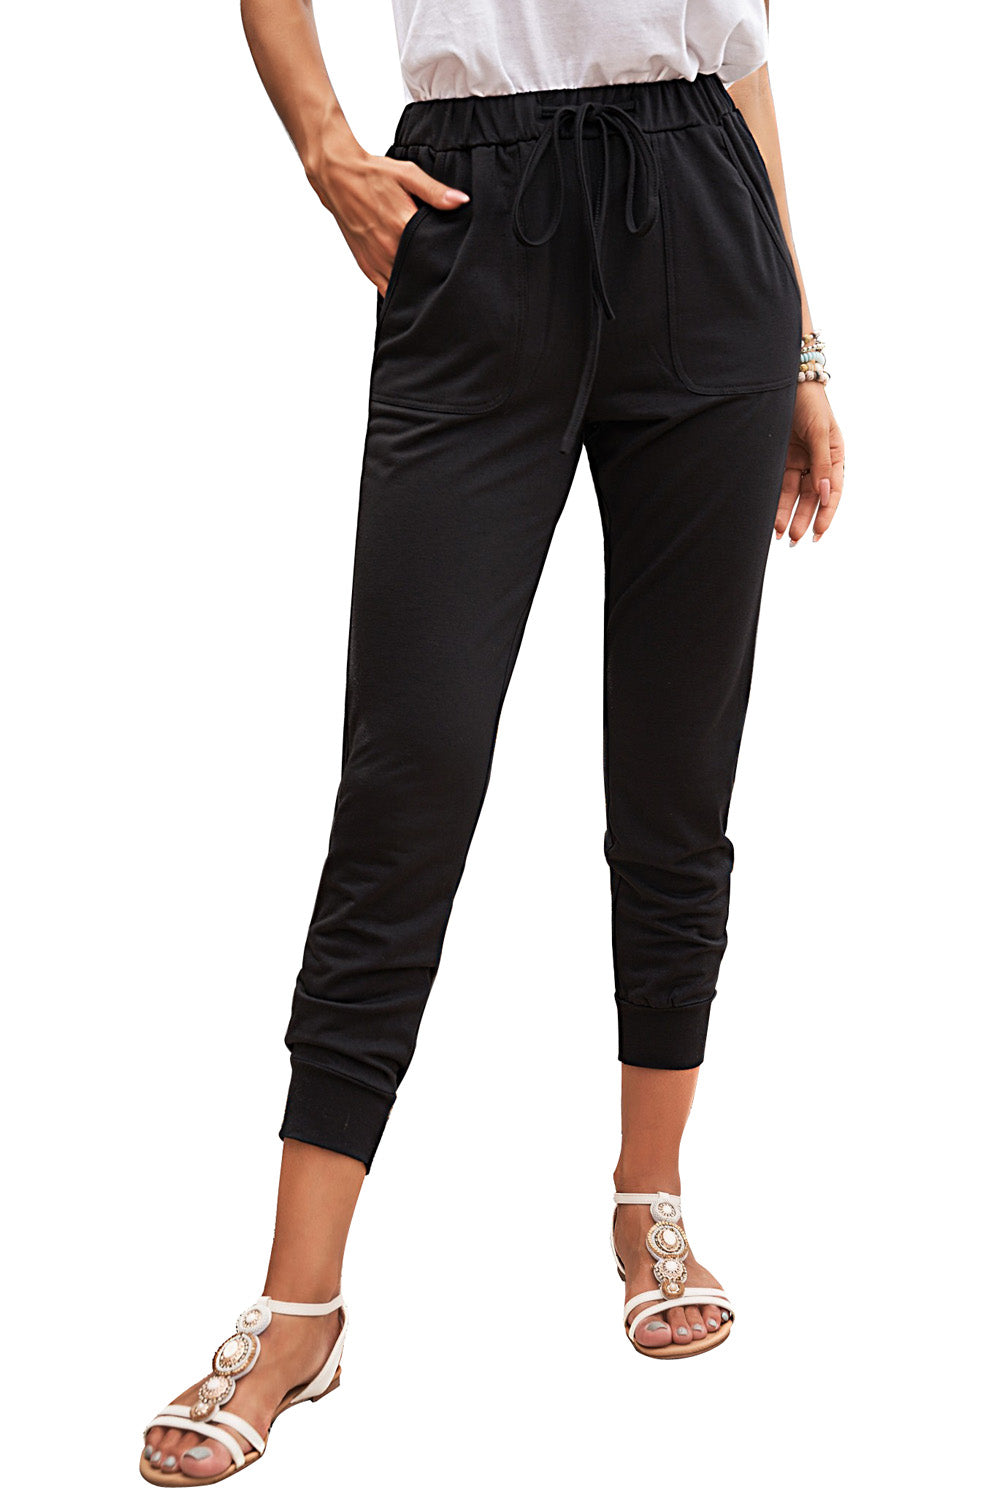 Women's Casual Black Pocketed Drawstring Sports Joggers